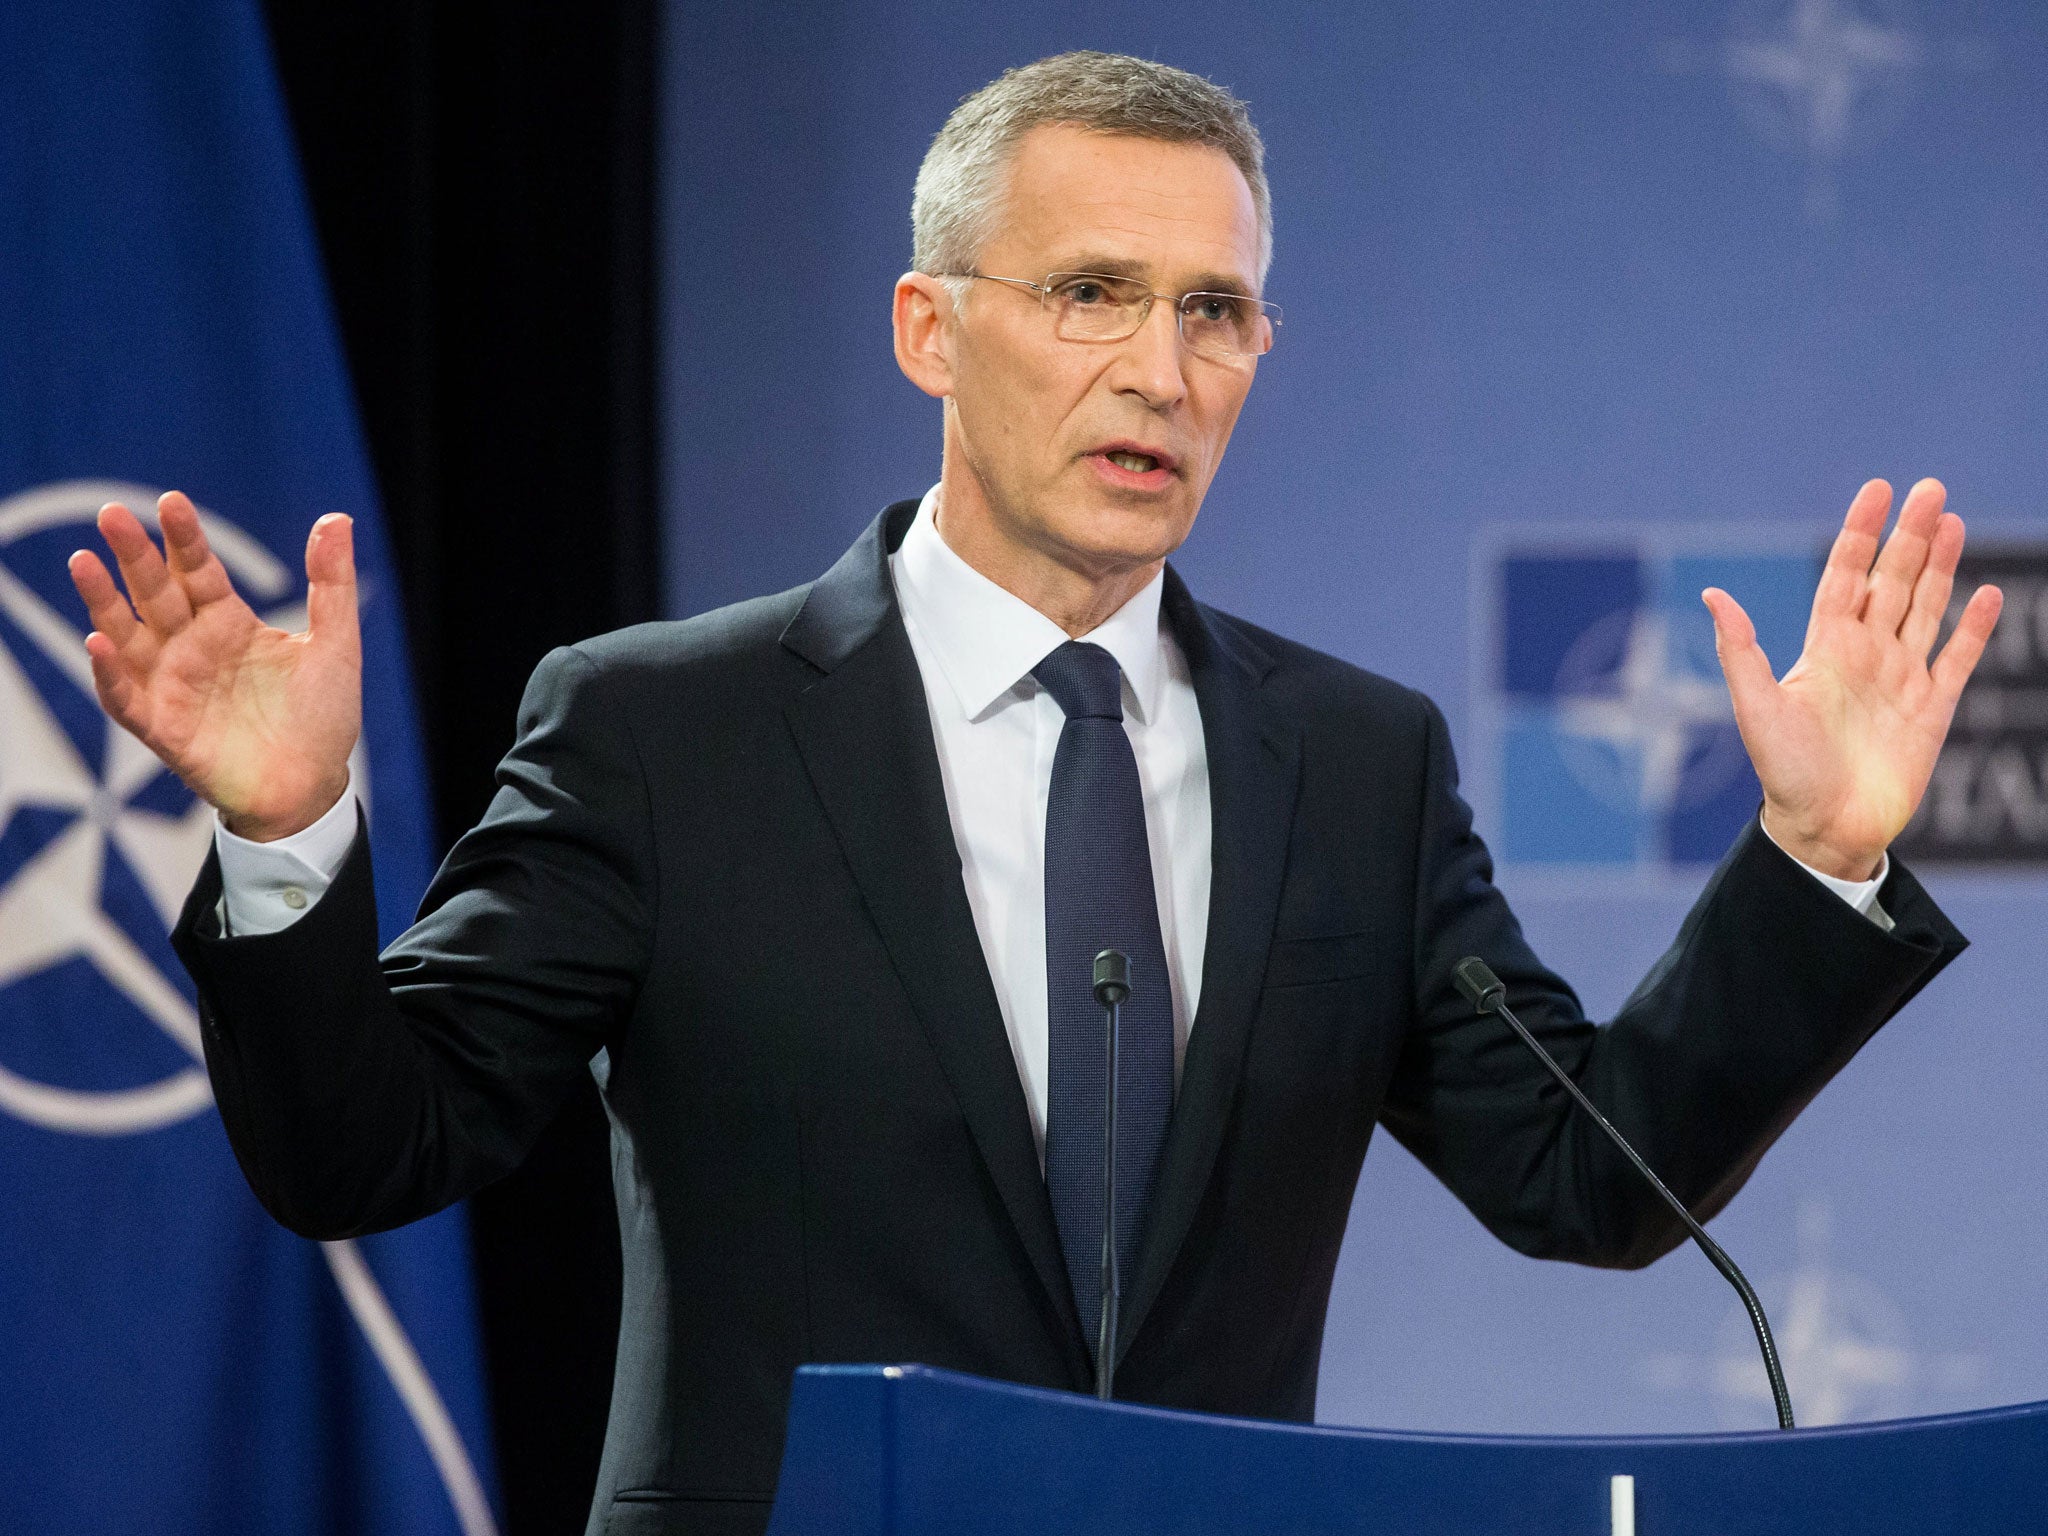 Nato Secretary General Jens Stoltenberg presents the alliance's annual report at its headquarters in Brussels